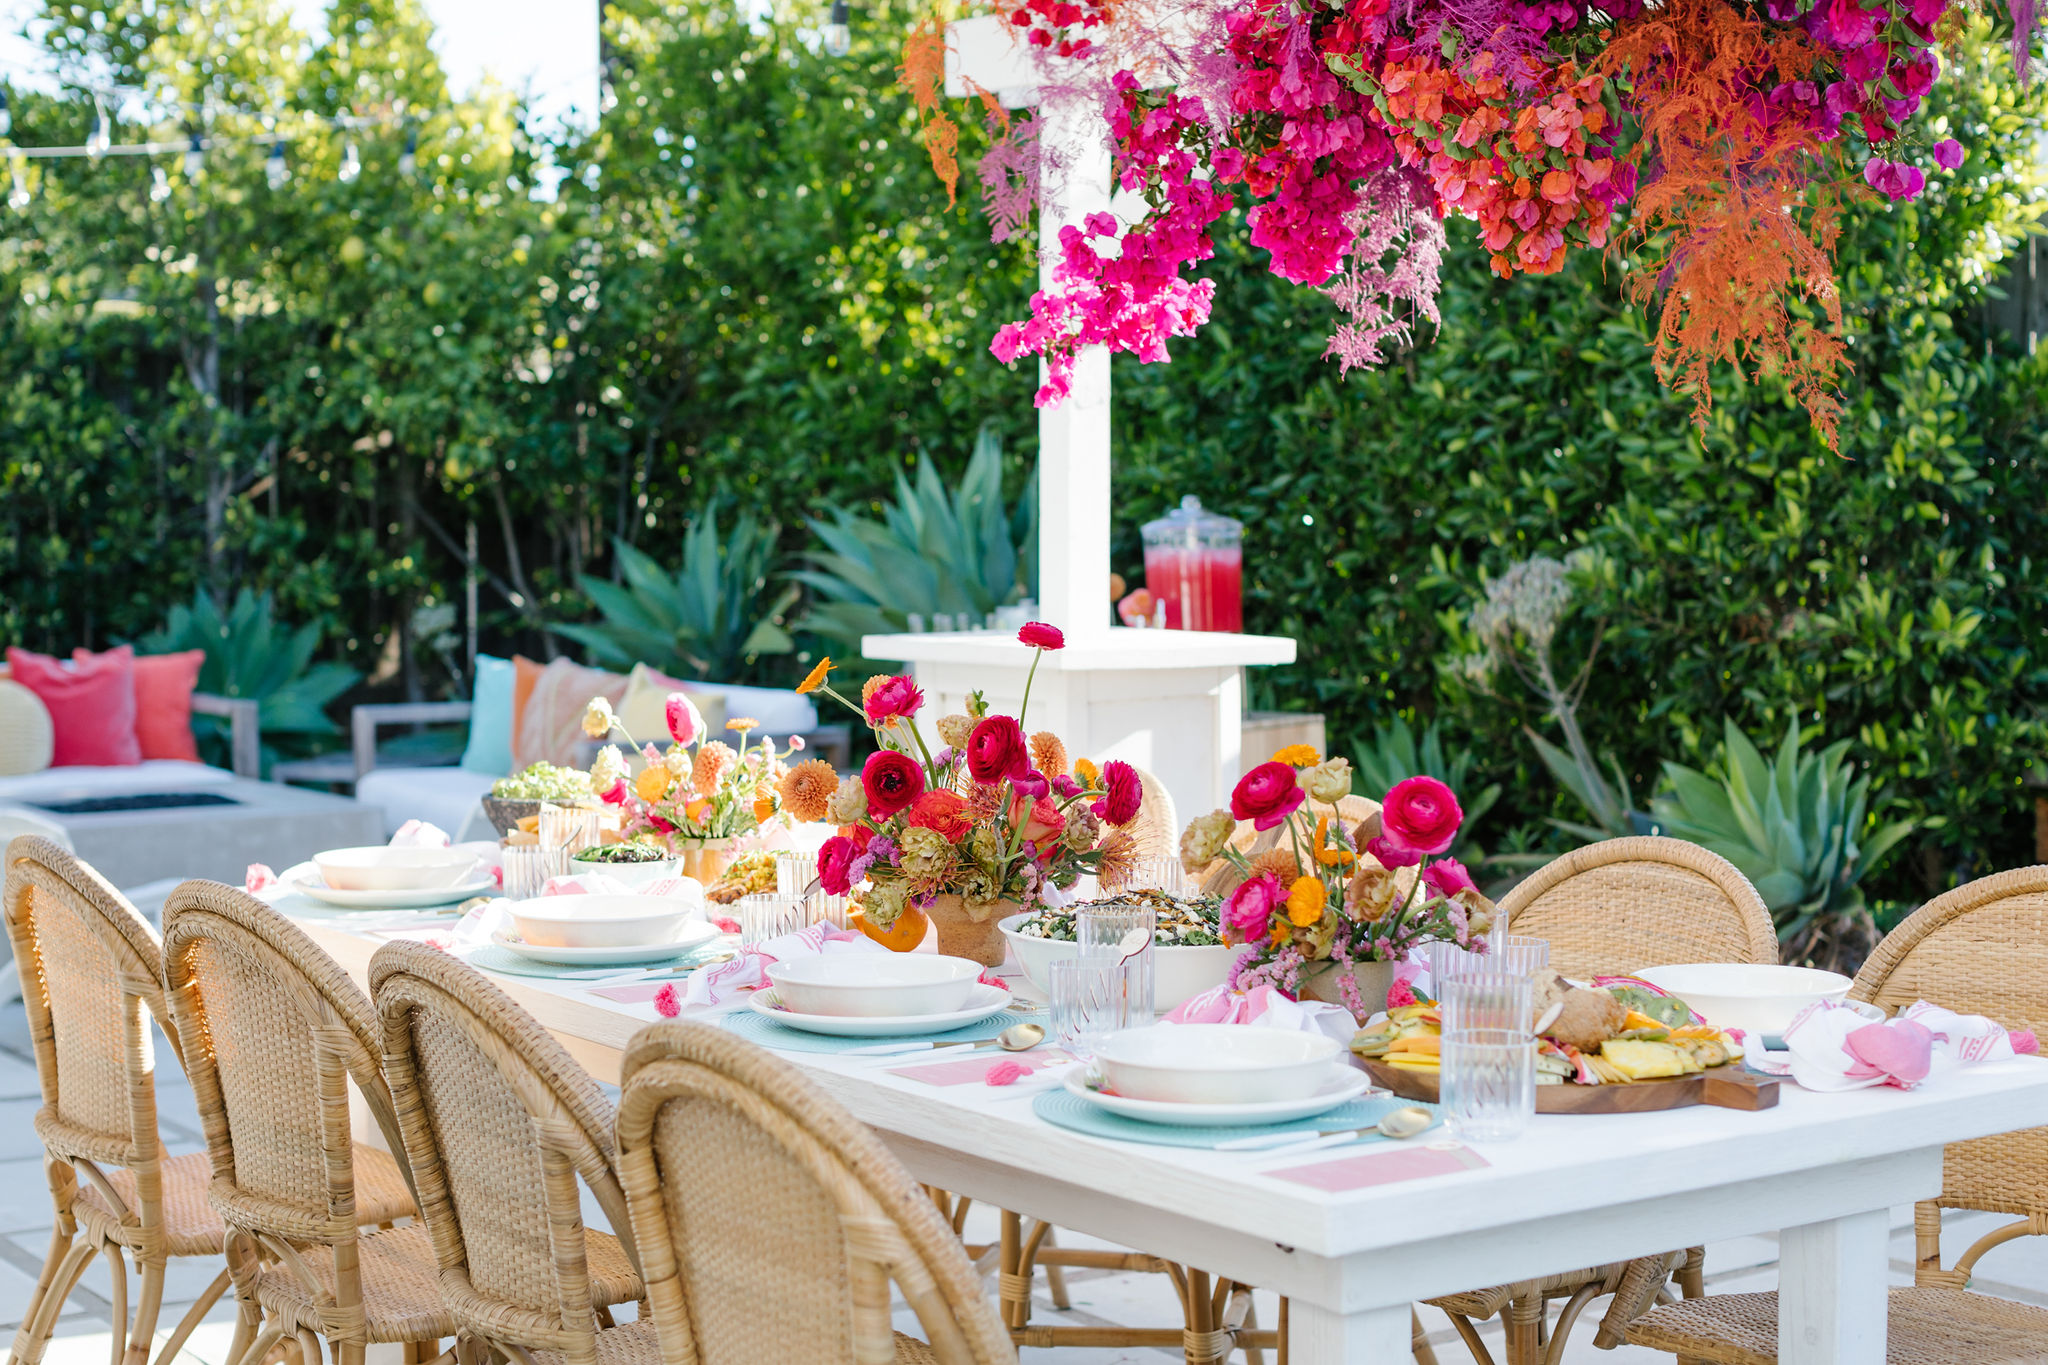 A Colorful Summer Evening full of Delight with Sur La Table’s Maravilla Collection